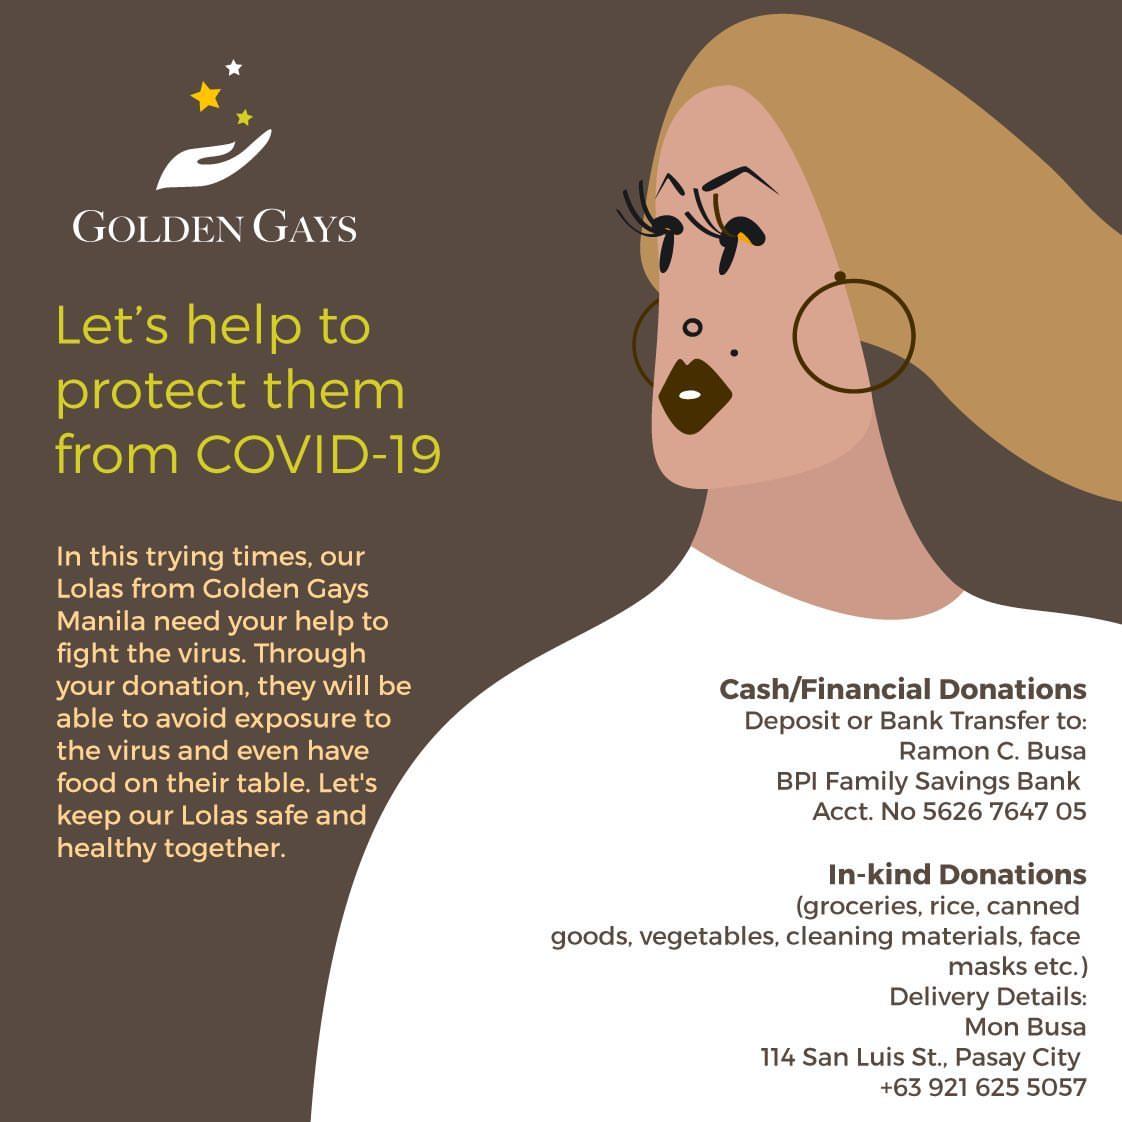 The Golden Gays are going to need a lot of help. They're all elderly, and lack any other social support system outside of the group. Especially vulnerable during the pandemic, and could use some supplies.poster by @gelographie